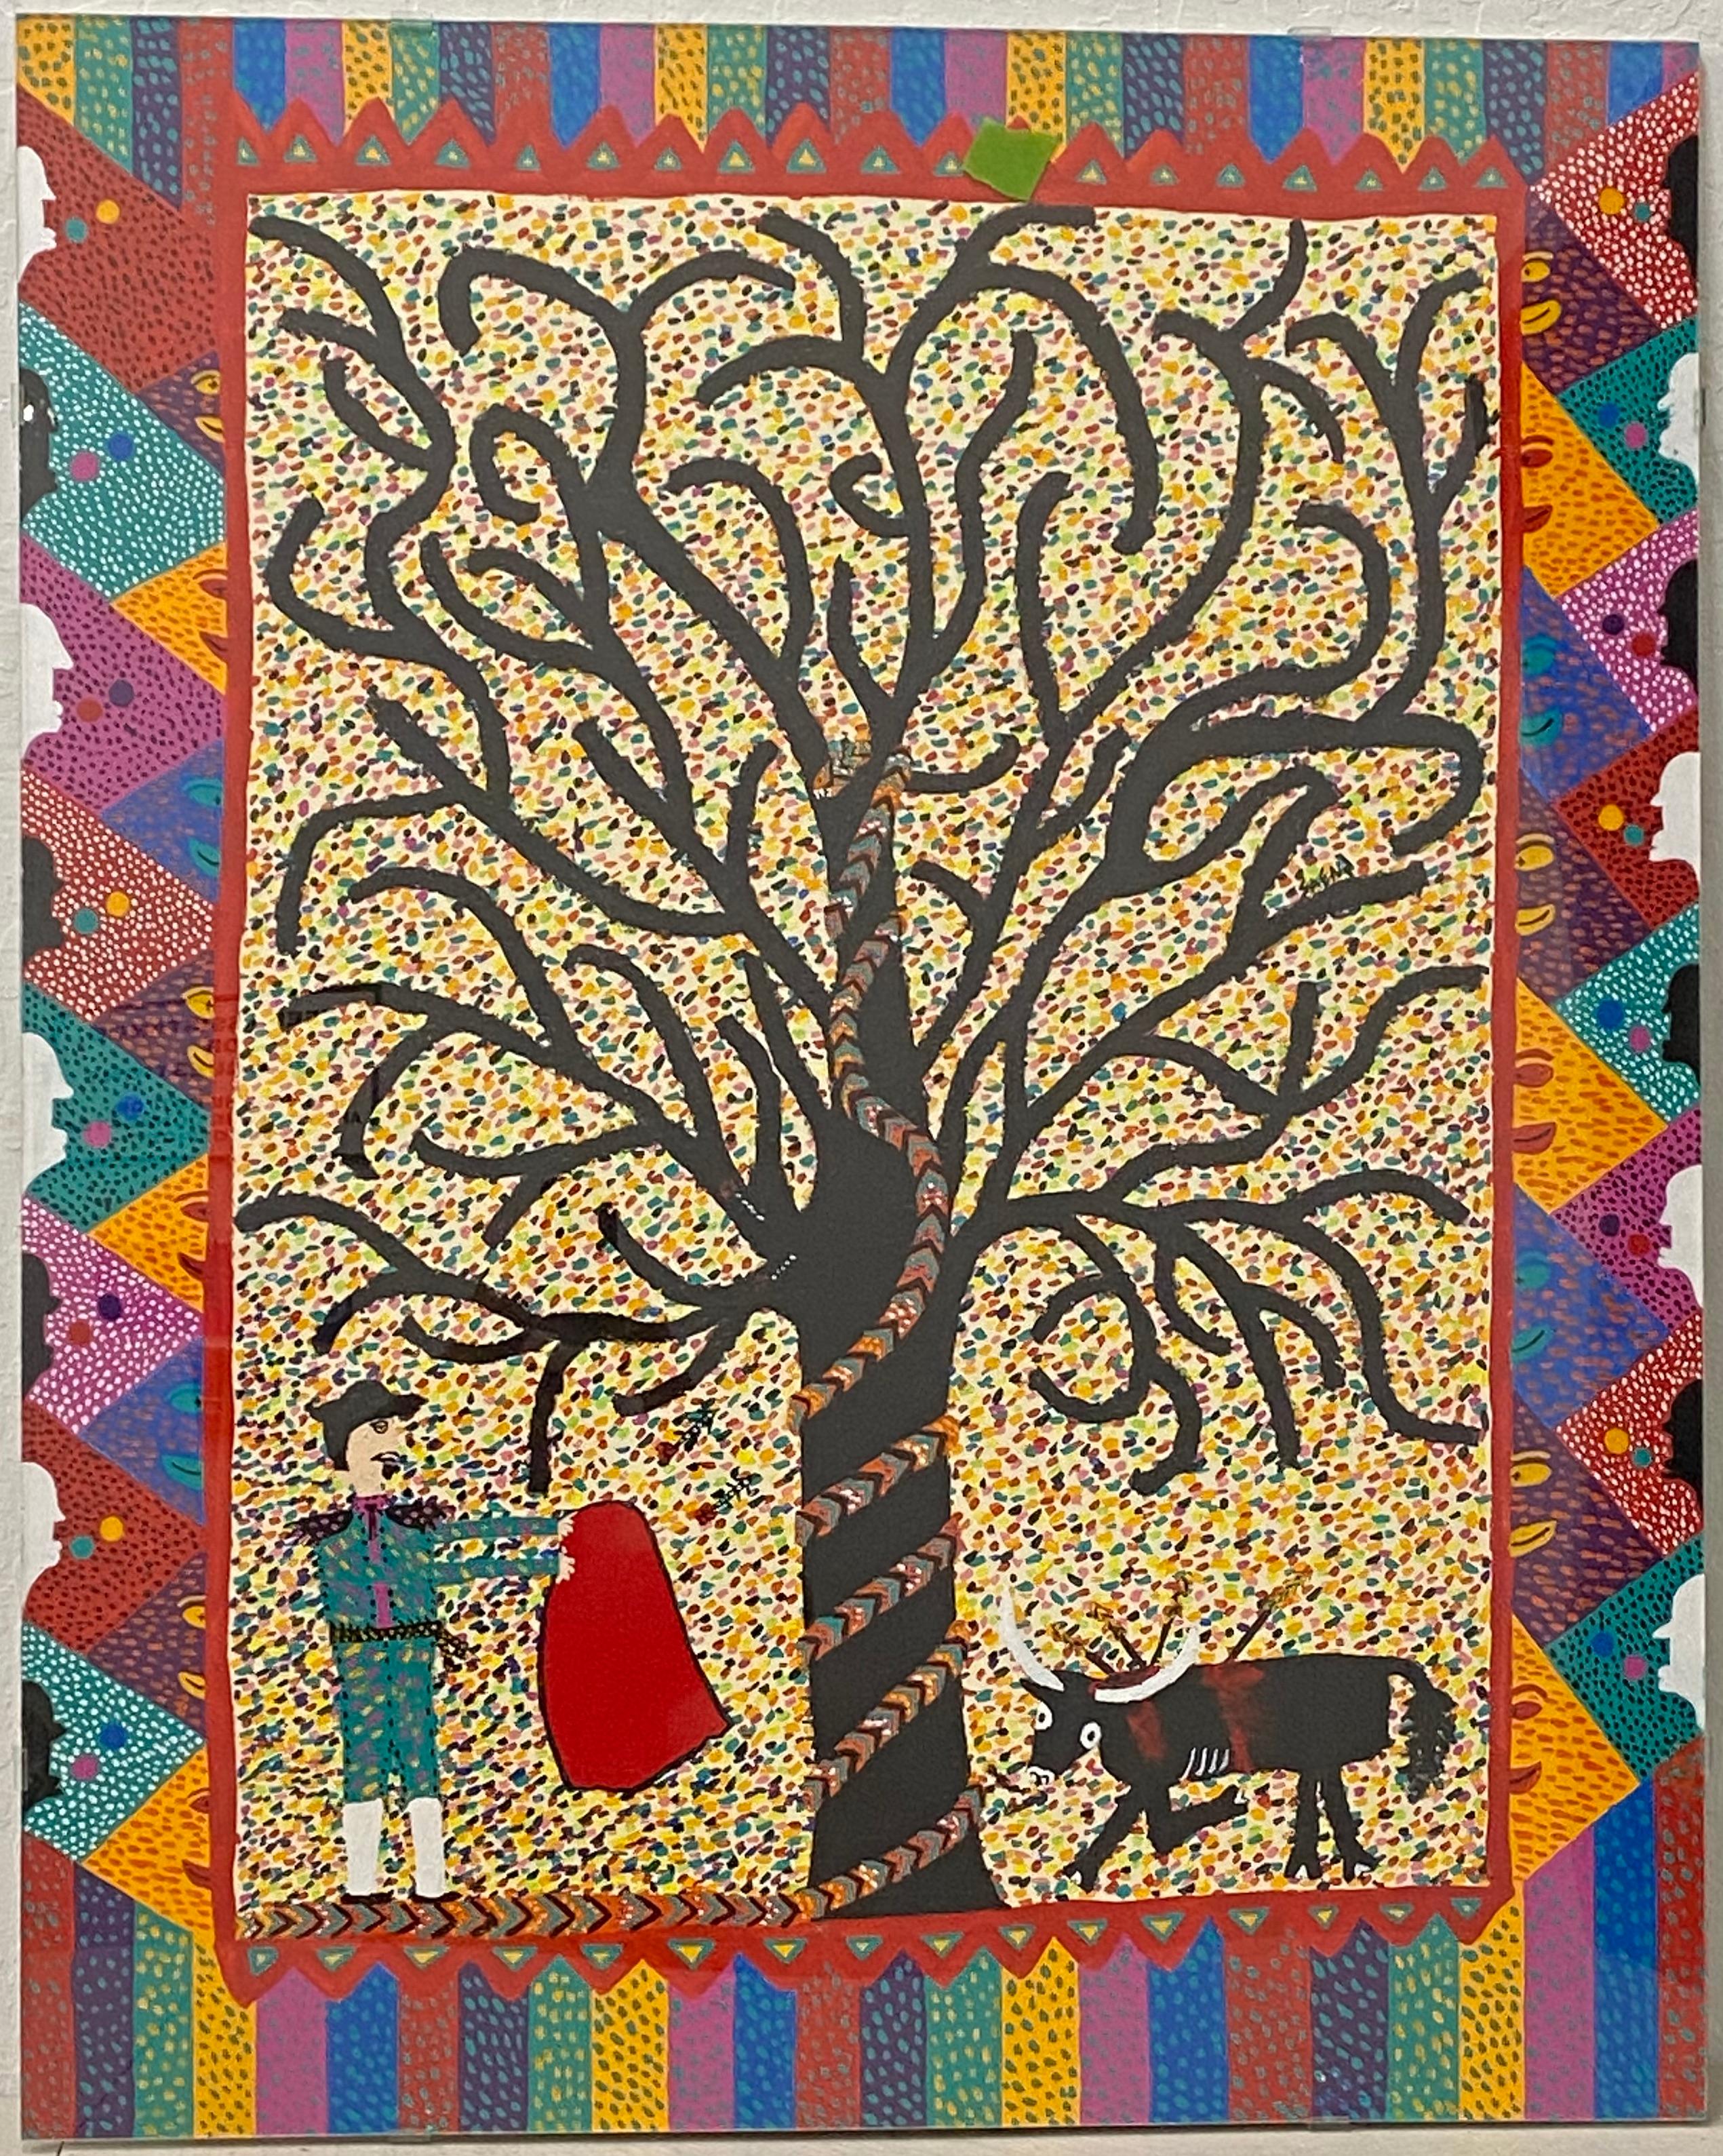 Contemporary Folk Art "Adam and Eve" Painting by Saenz